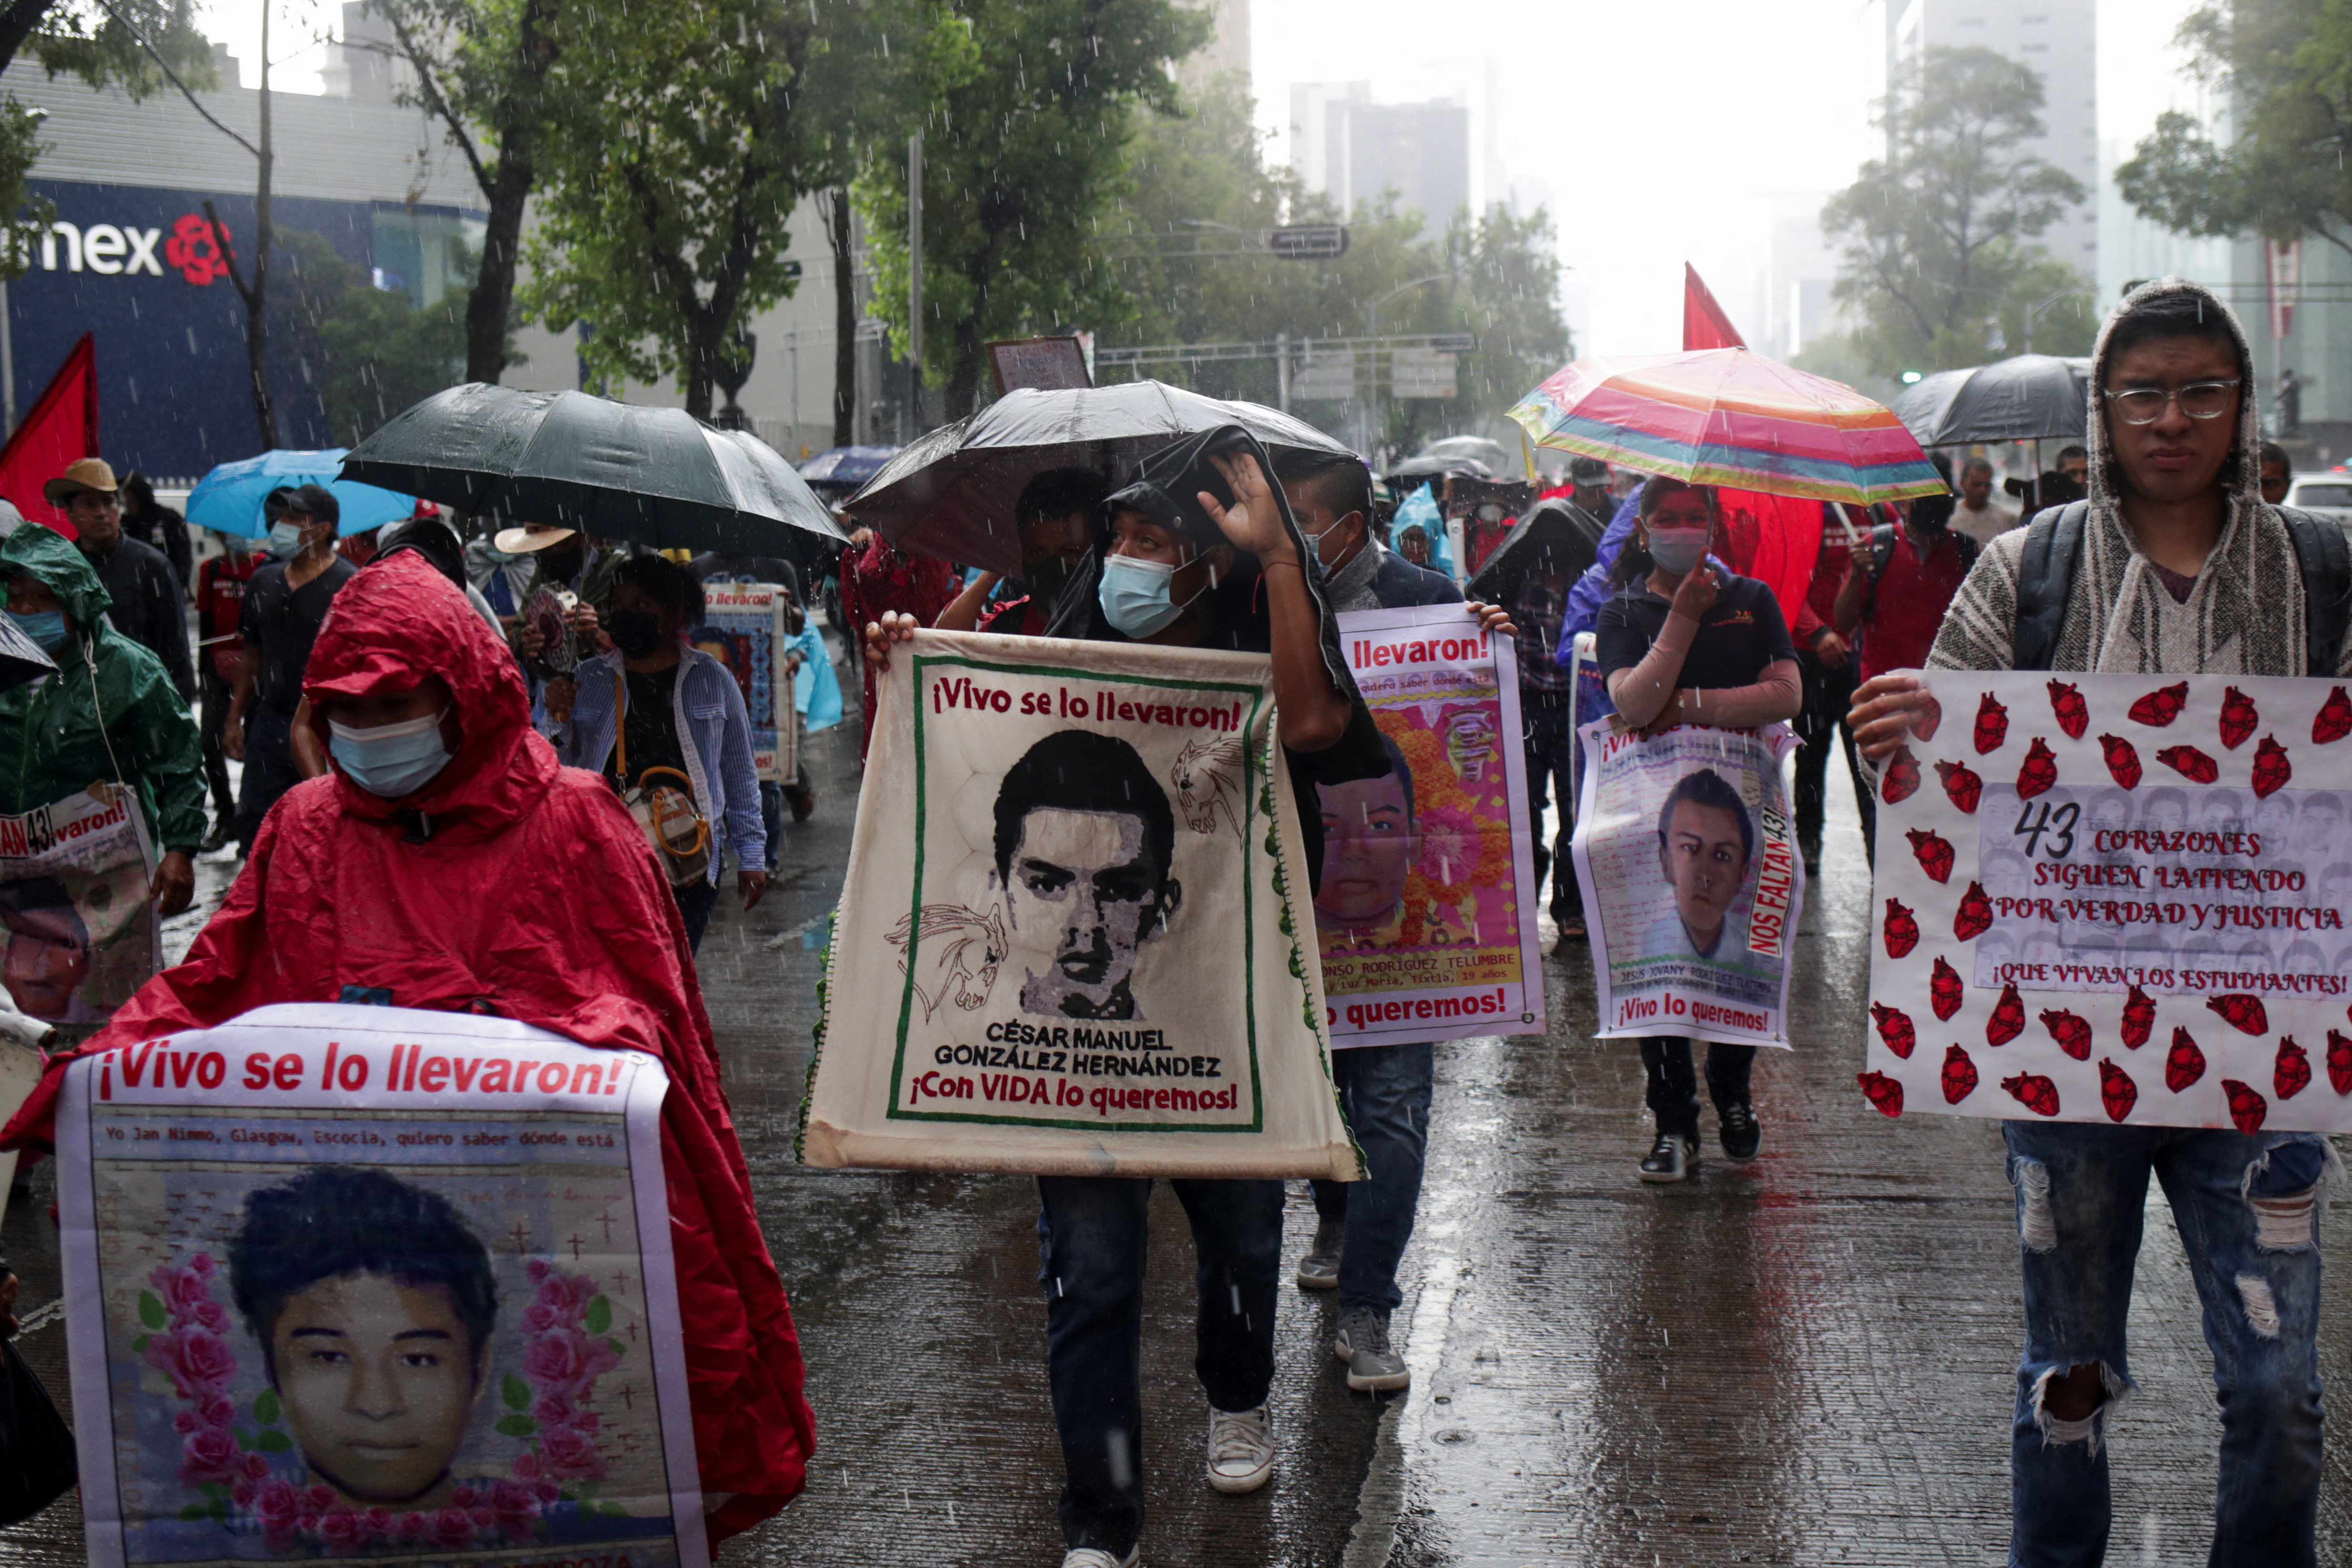 Relatives of the missing students from Ayotzinapa Teacher Training College protest in Mexico City